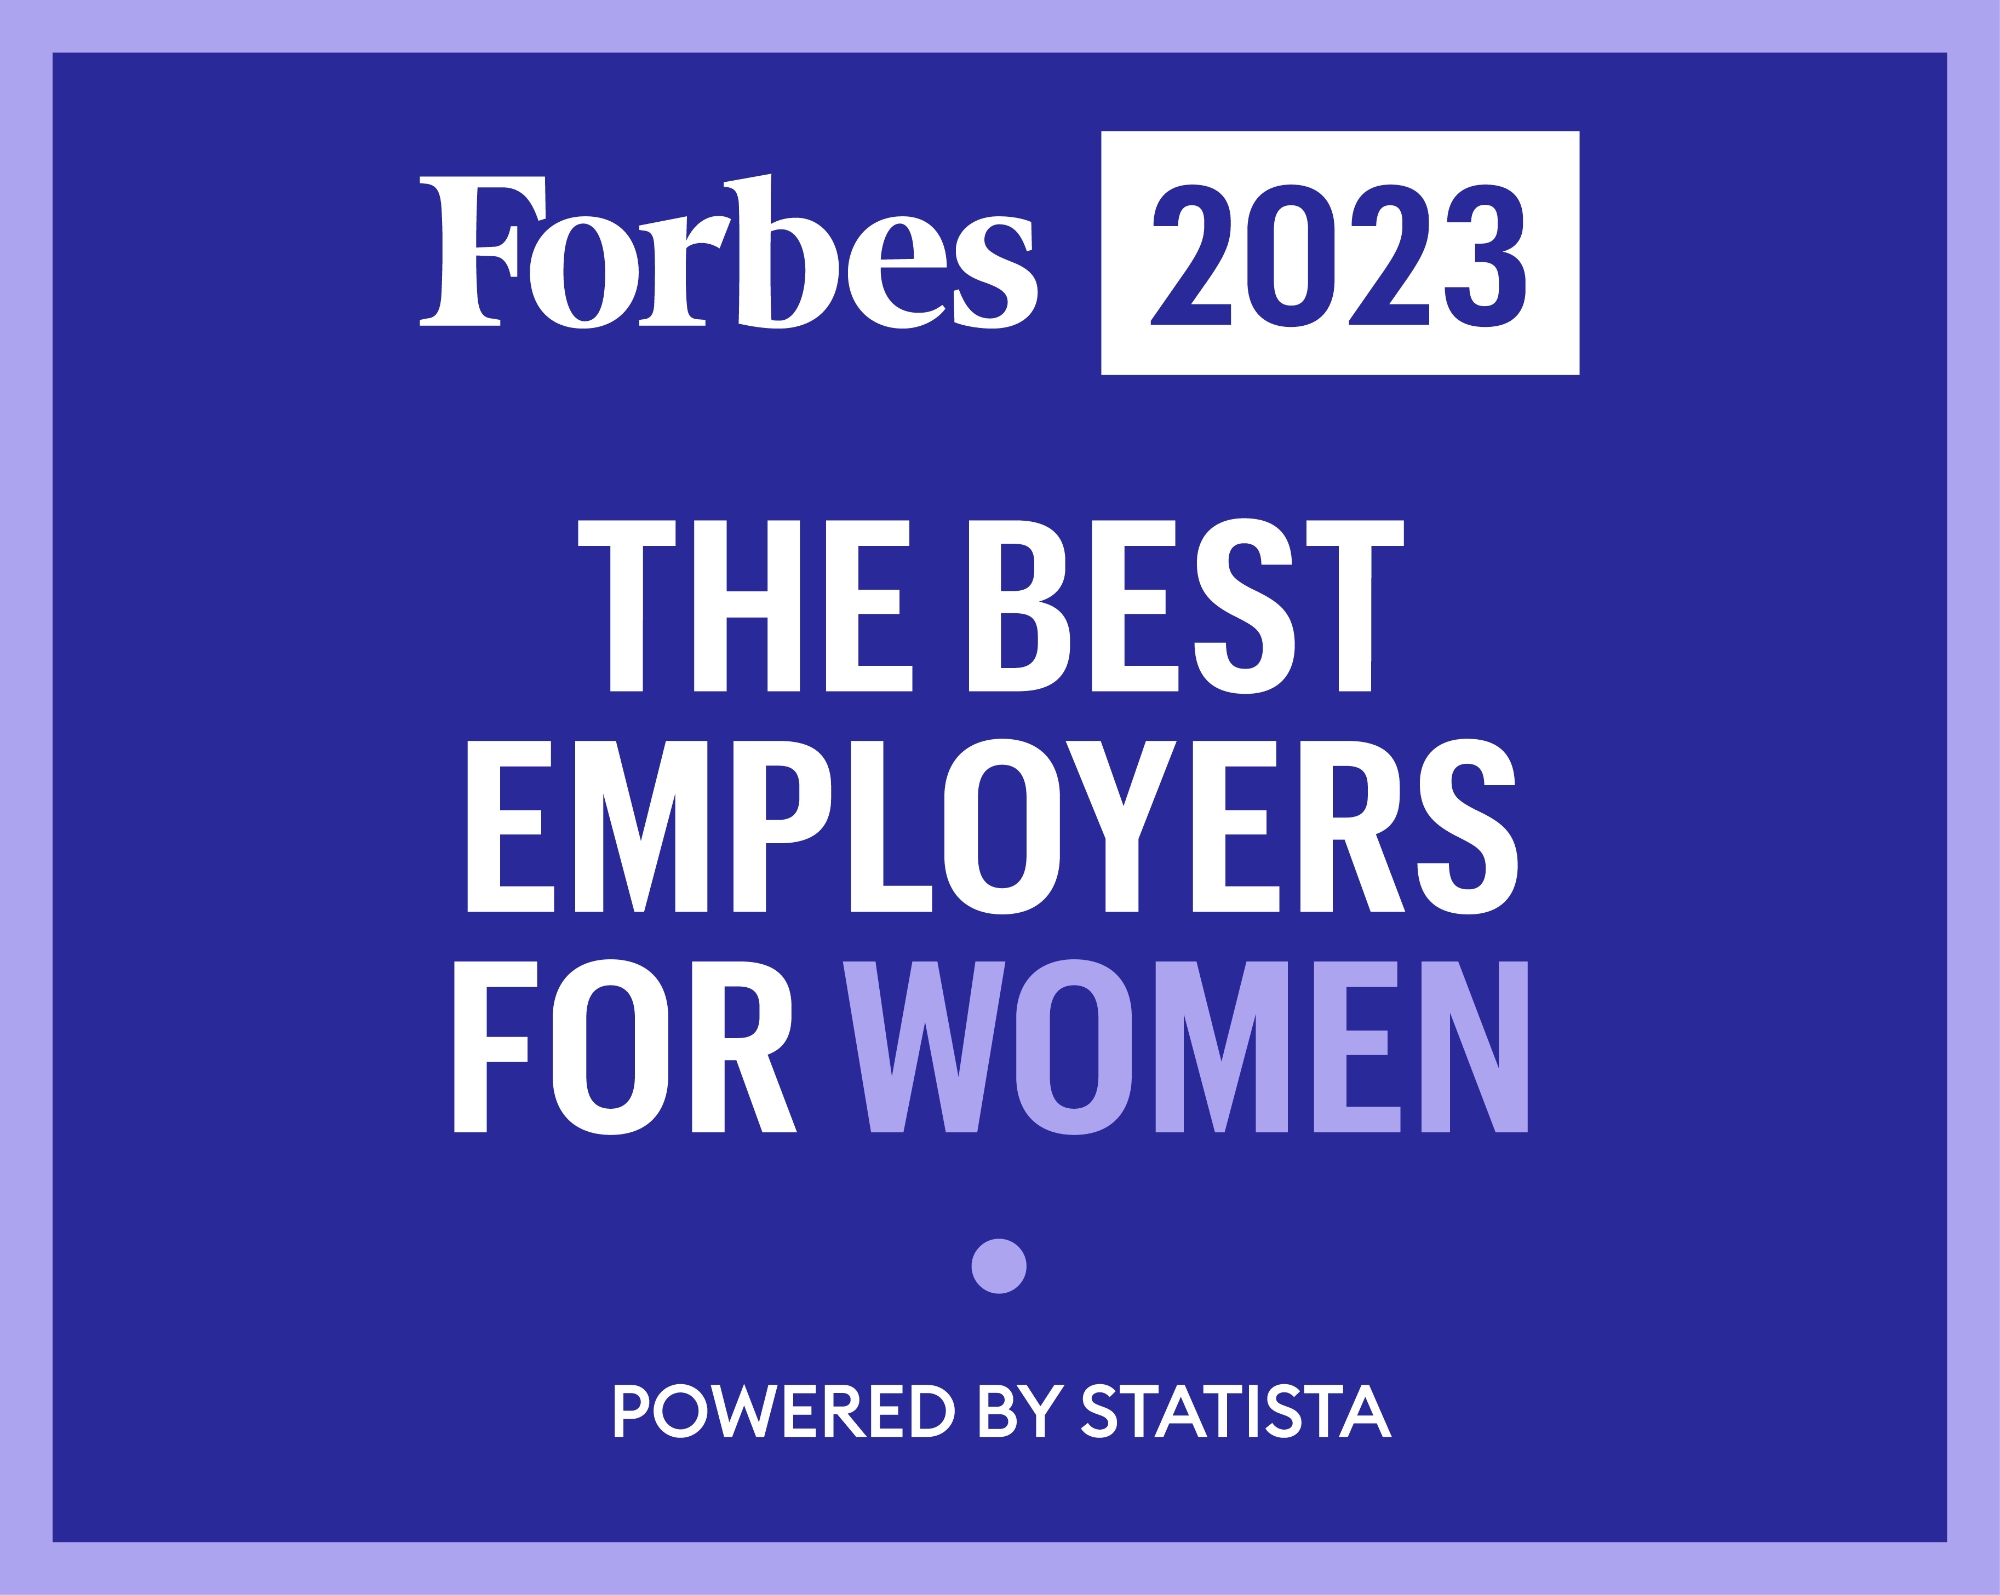 Forbes 2023, The Best Employers for Women, Powered by Statista.